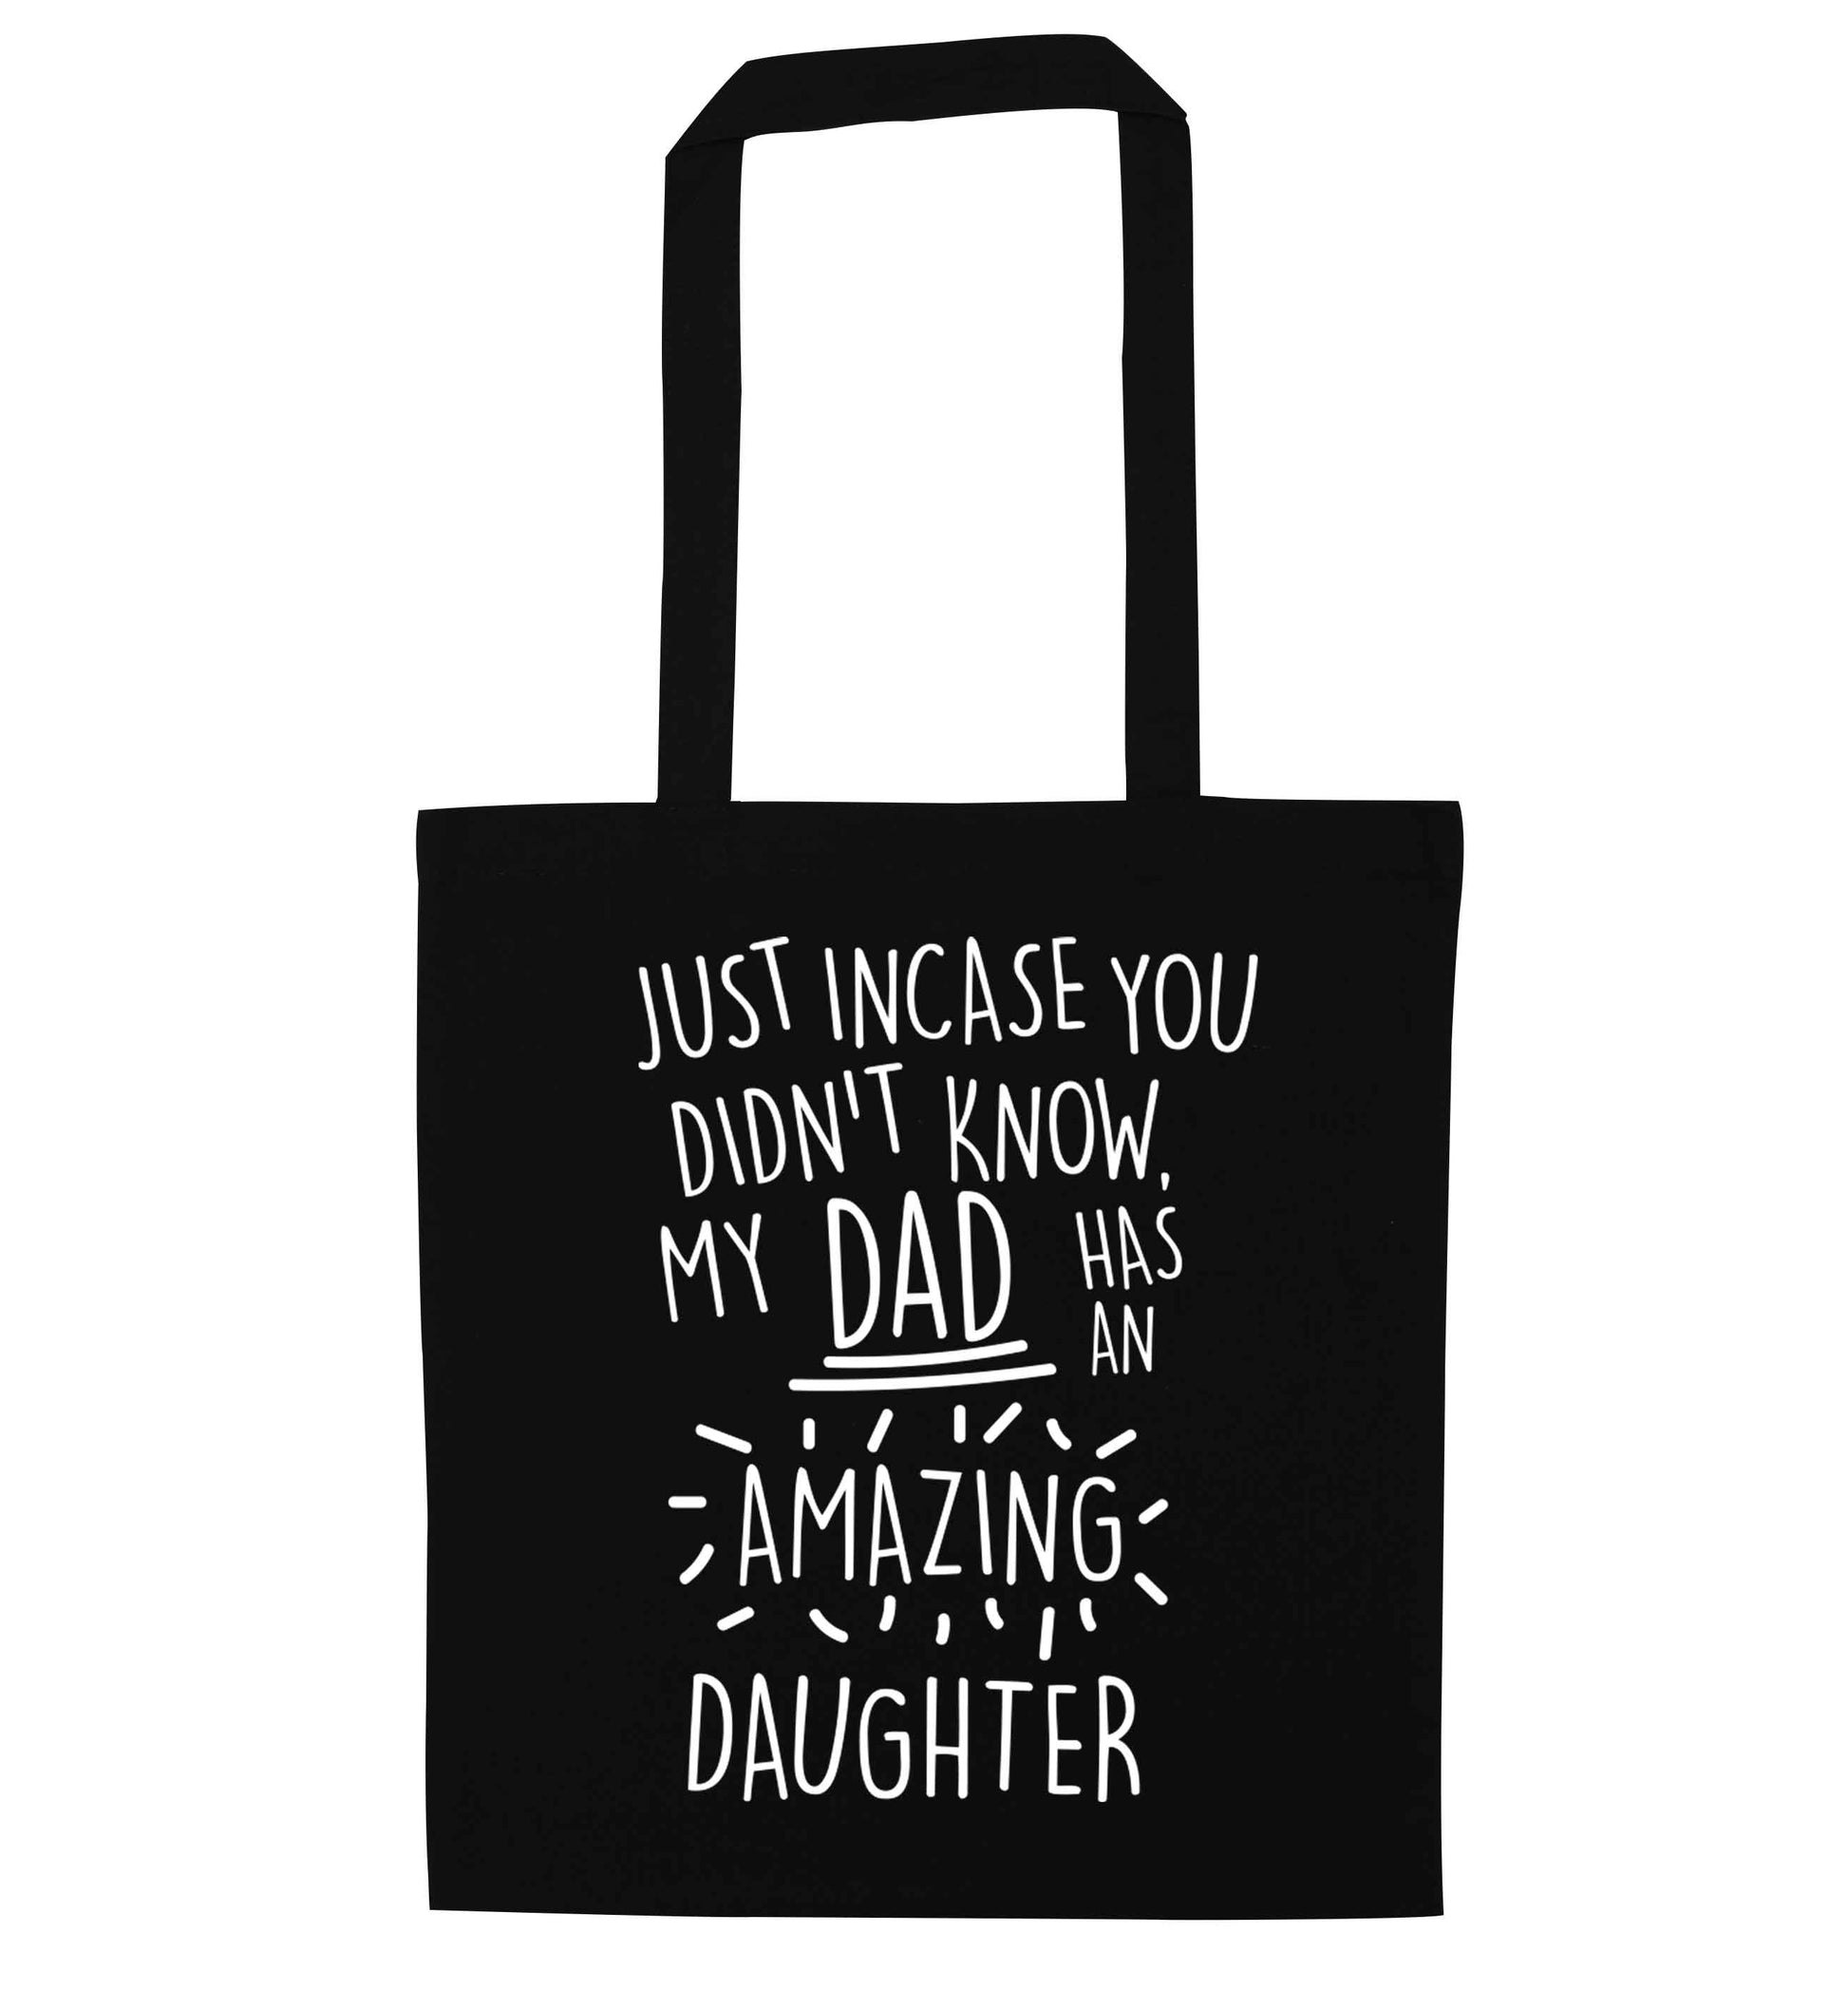 Just incase you didn't know my dad has an amazing daughter black tote bag